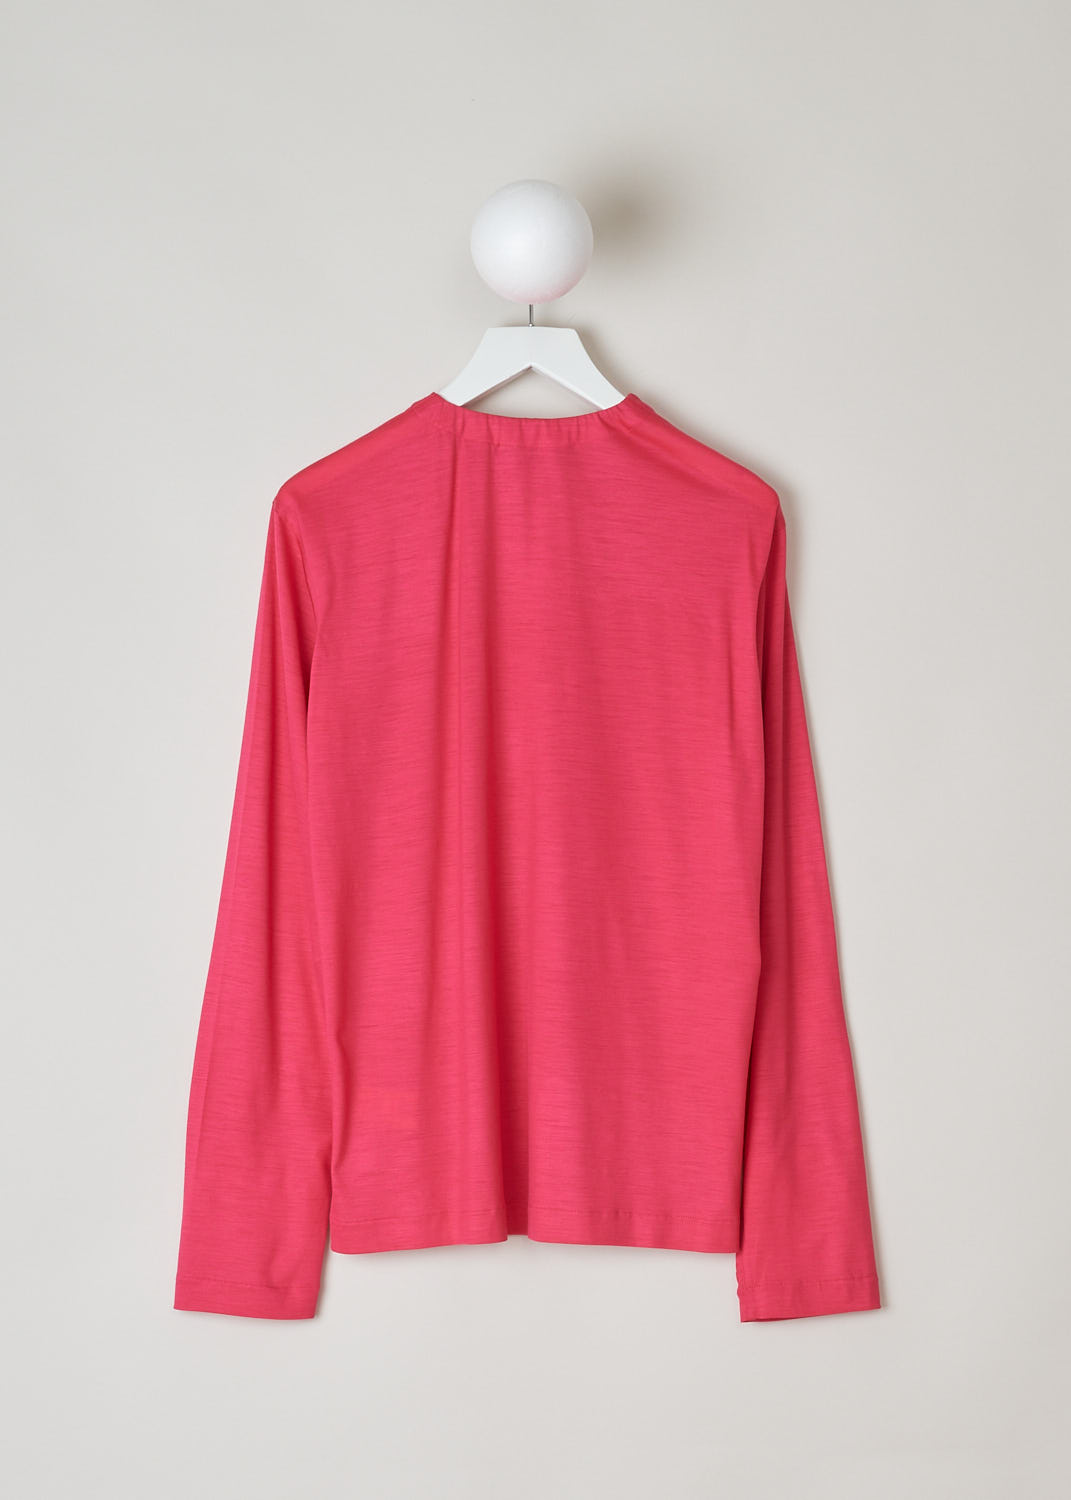 SOFIE Dâ€™HOORE, LONG SLEEVE FUCHSIA TOP, BRIANNA_WOJE_FUCHSIA, Pink, Back, This fuchsia colored top features a gathered elasticated neckline. The long sleeve top drapes the bodice, creating a relaxed fit. 
